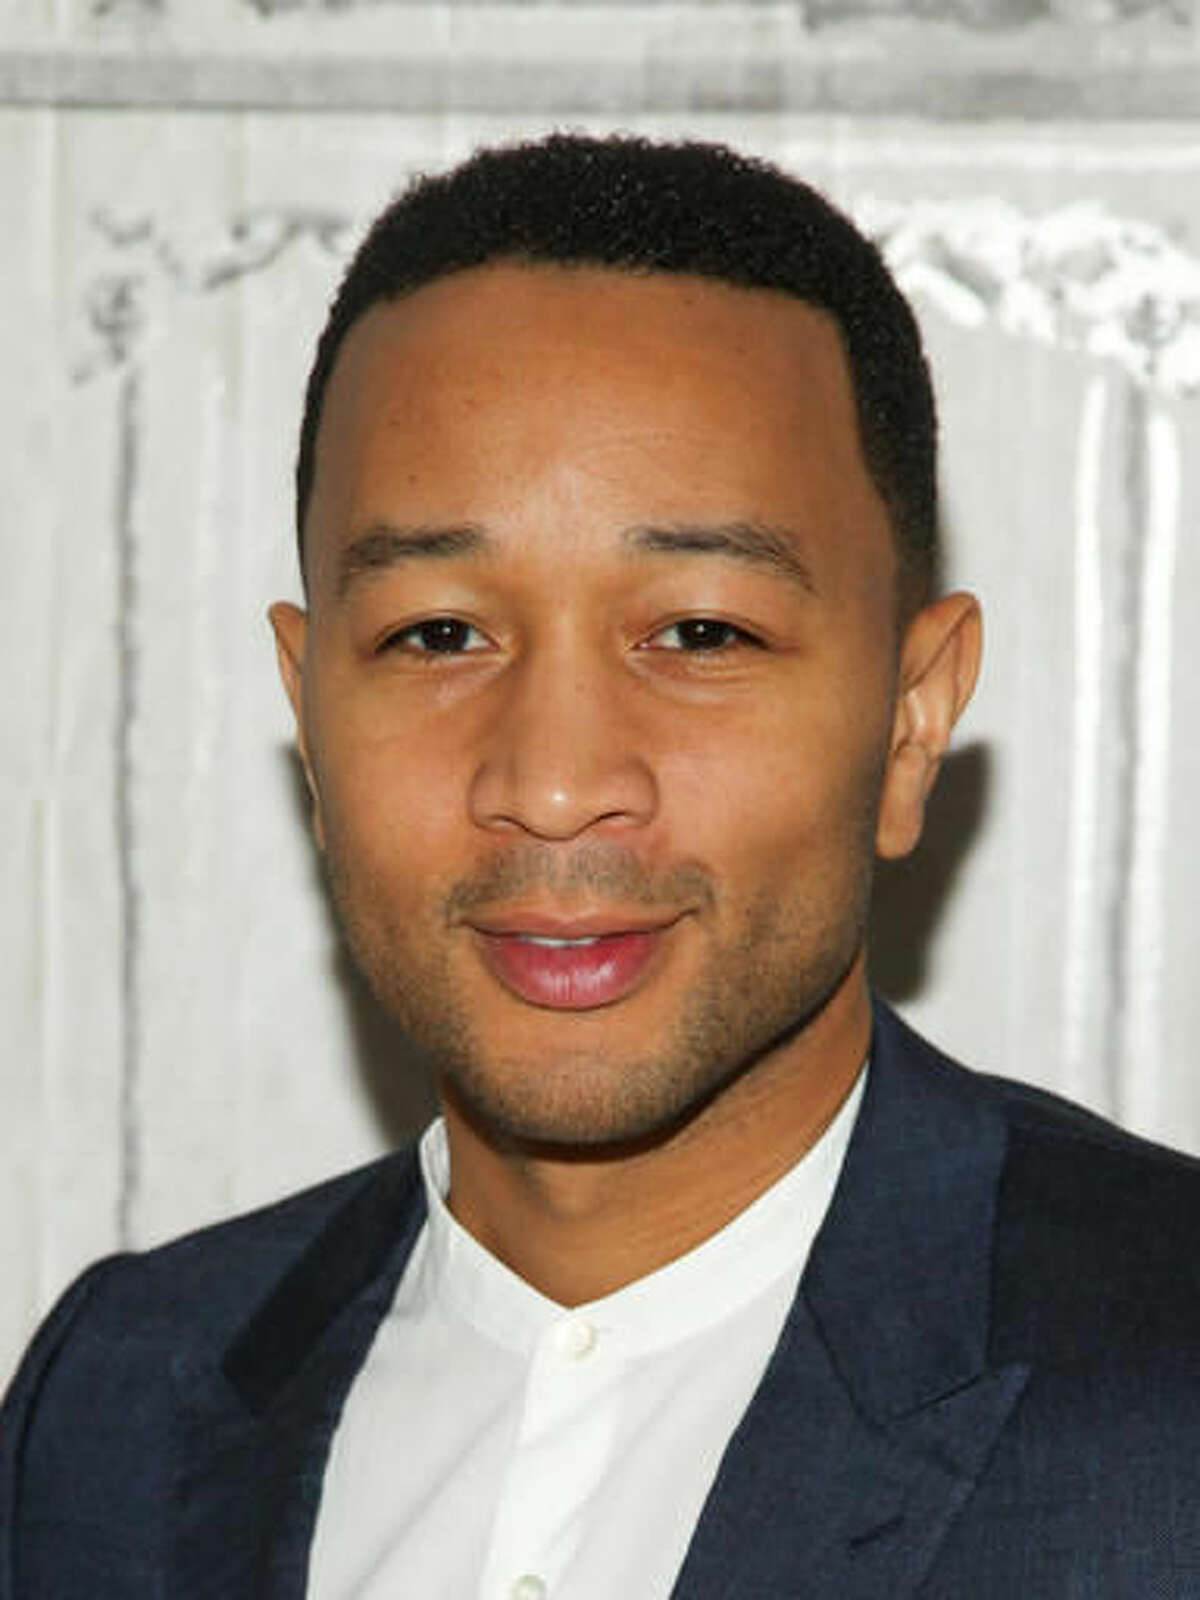 File- This March 9, 2016, file photo shows John Legend at AOL's BUILD Speaker Series to discuss his 10-episode WGN Network series "Underground" at AOL Studios in New York. The Oscar- and Grammy-winning artist is set to perform at the dedication of a recently renovated $2.5 million theater that’s named in his honor.(Photo by Andy Kropa/Invision/AP, File)